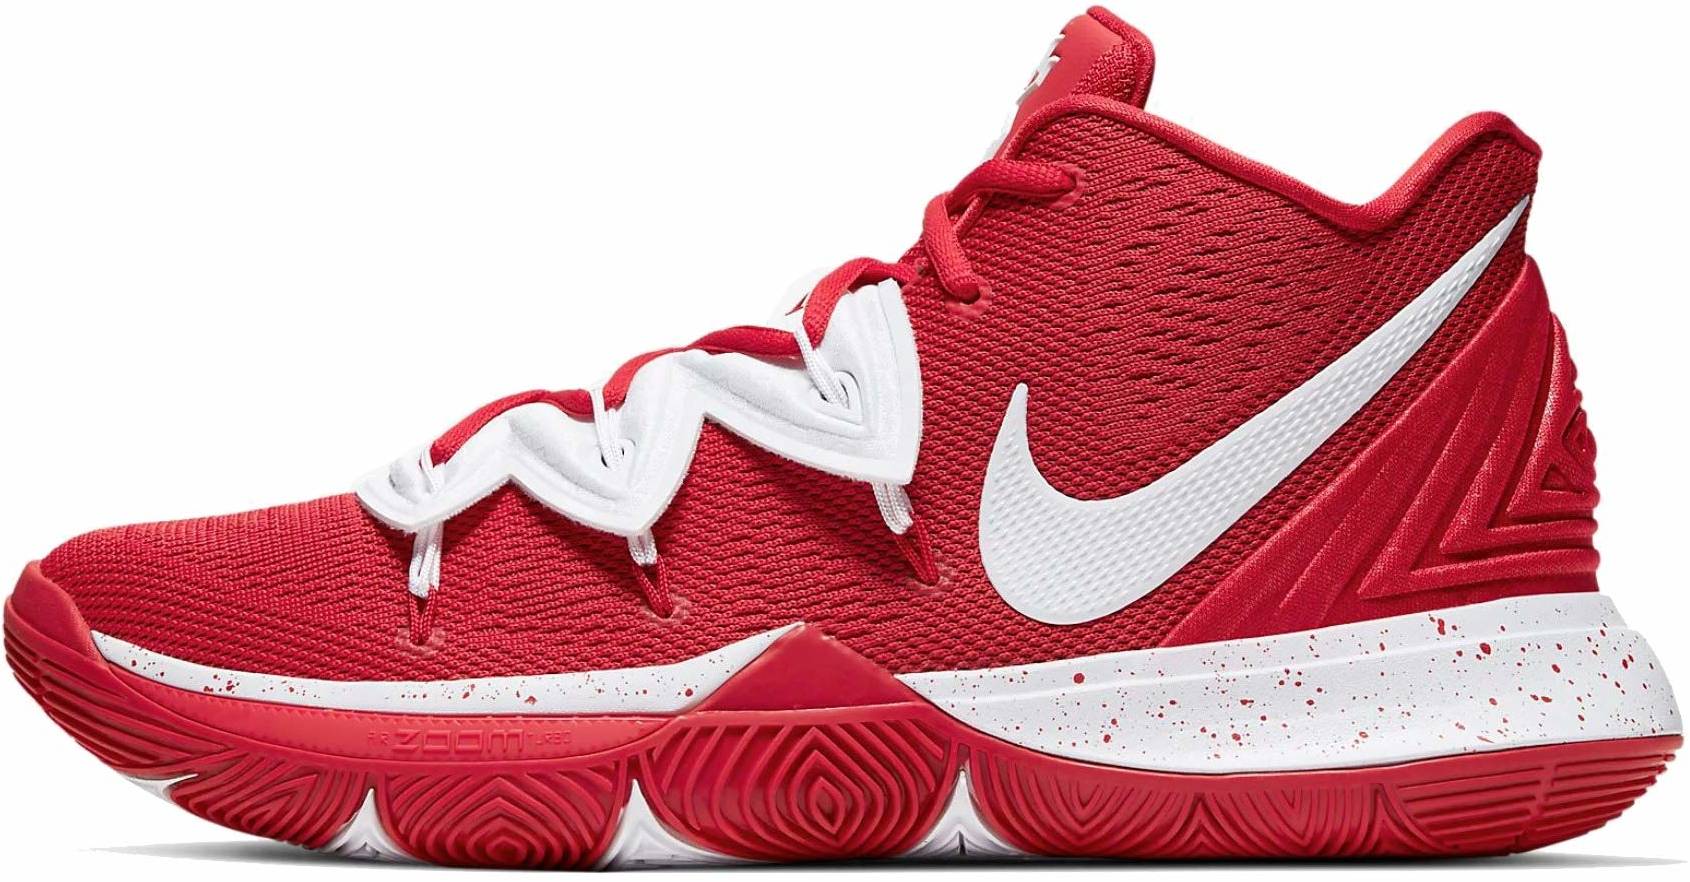 kyrie 5 red and white